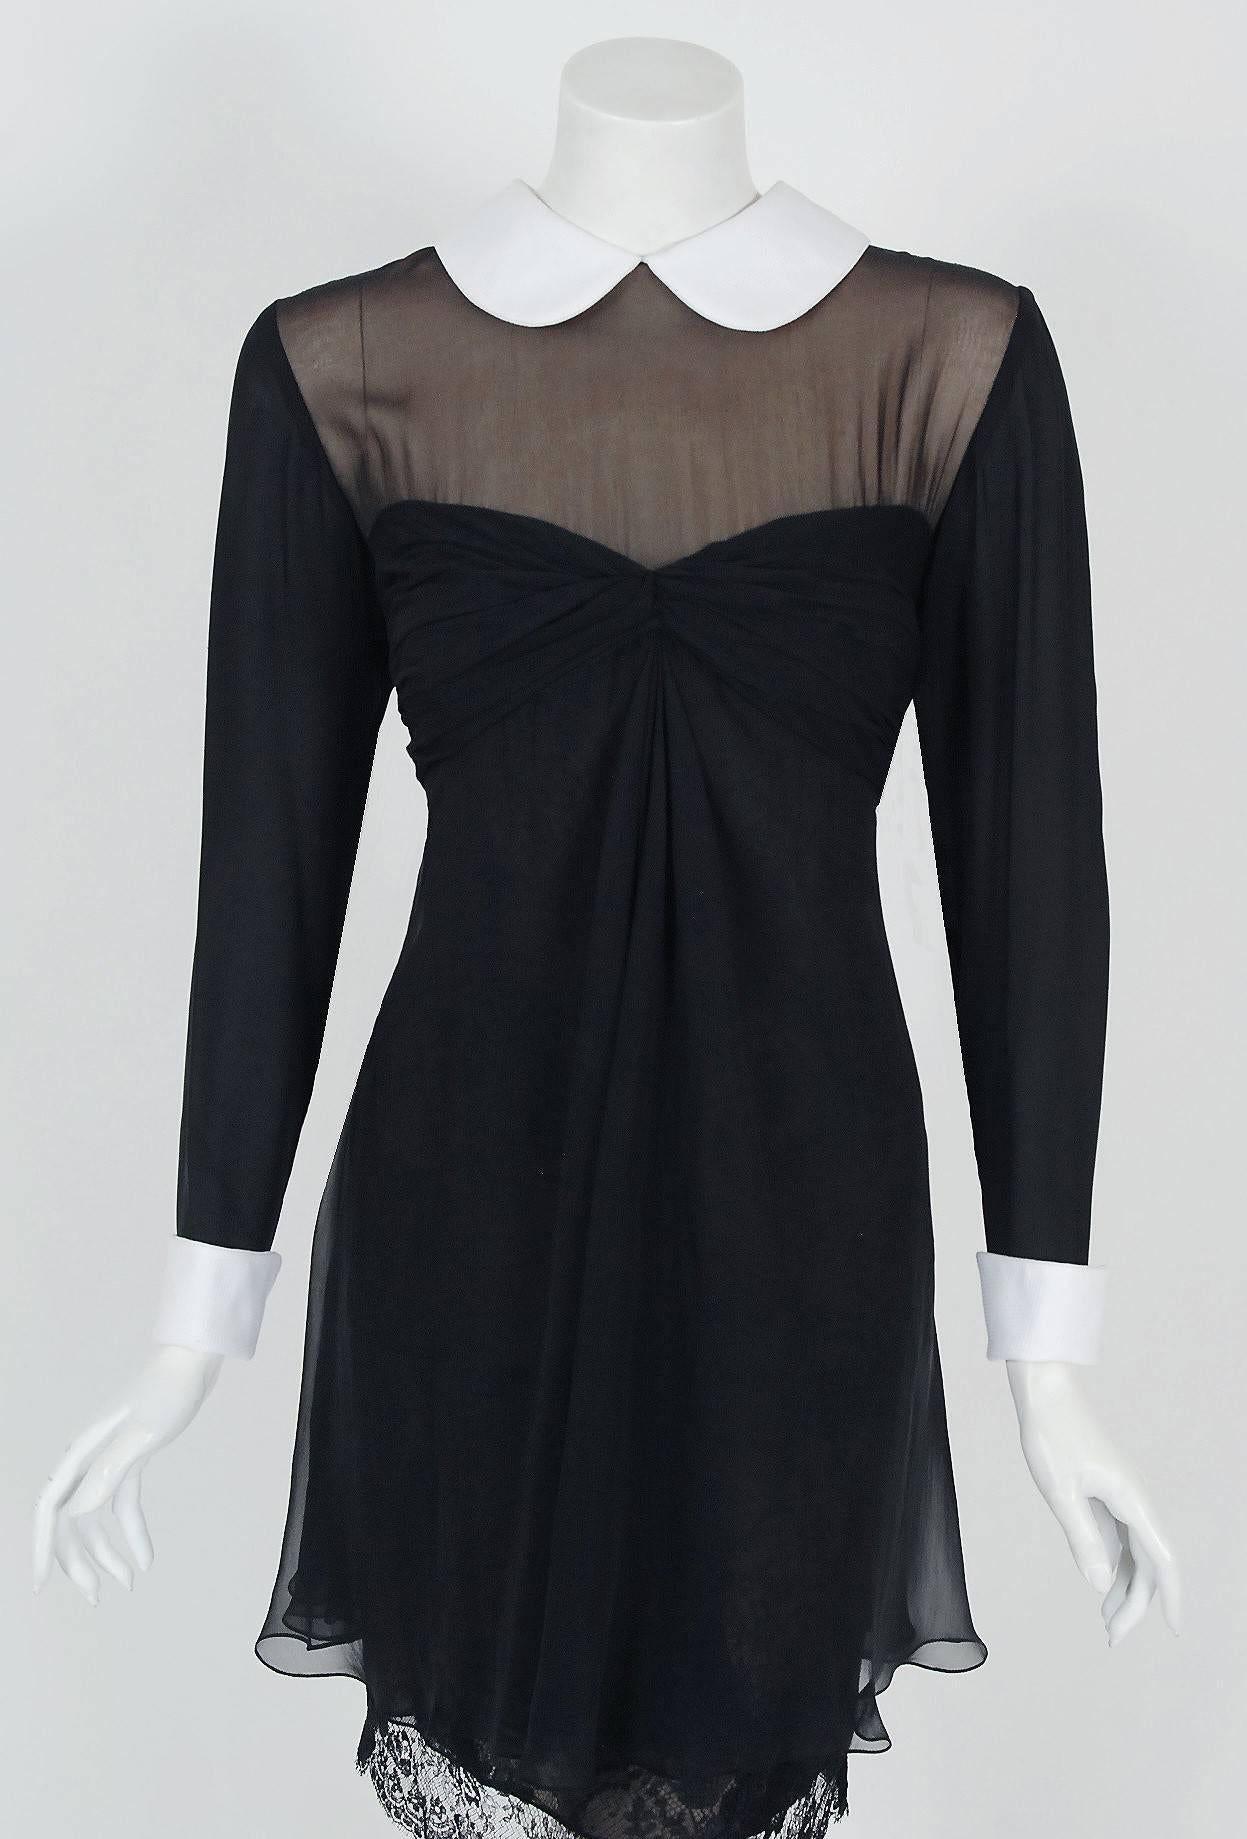 Gorgeous Bill Blass designer black silk-chiffon and lace babydoll dress dating back to the mid 1990's. In 1975 Bill Blass brought back the cocktail dress, which had all but disappeared from the fashion scene. This captivating number is a perfect